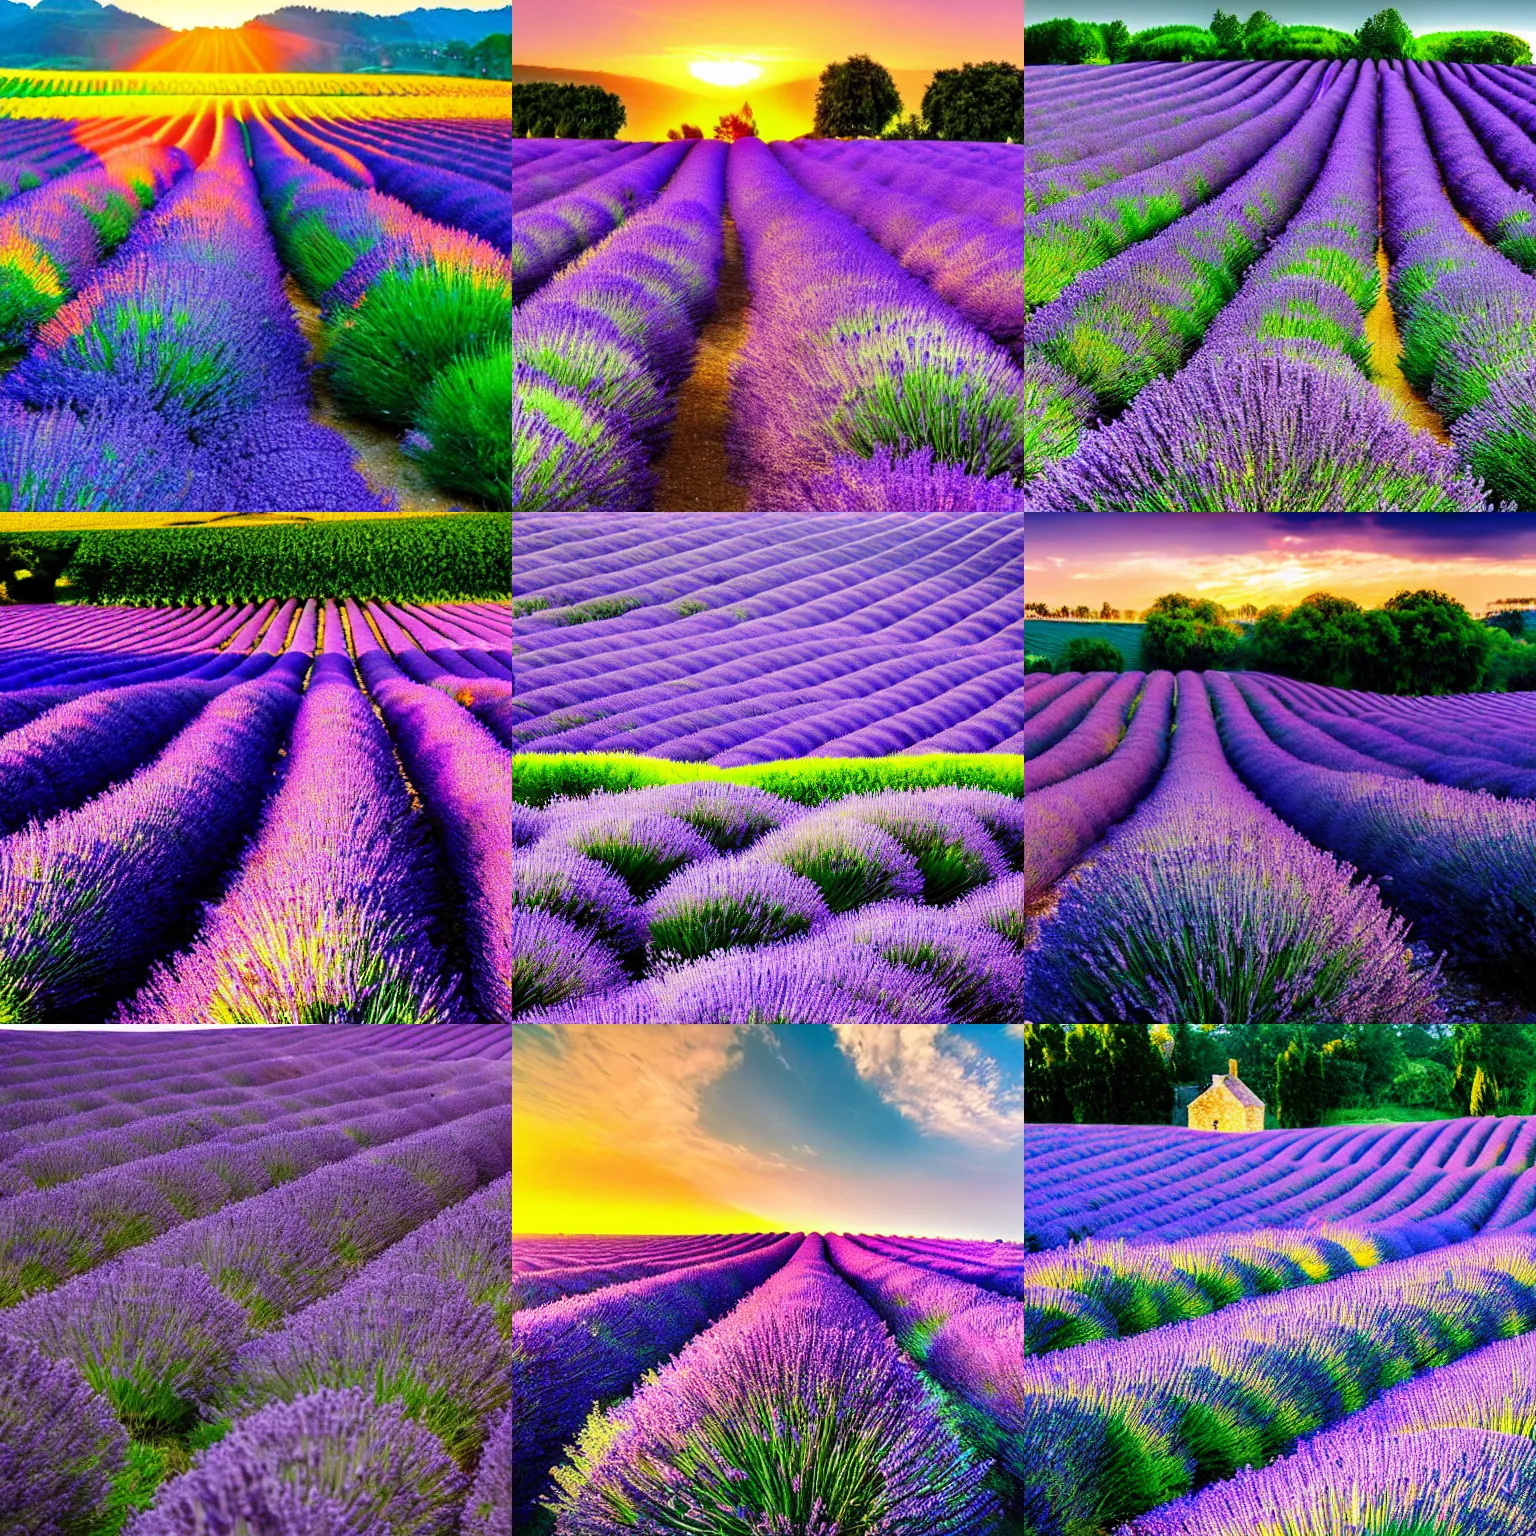 Prompt: Lavender Fields in full bloom, detailed photography, sunrise, beautiful scene